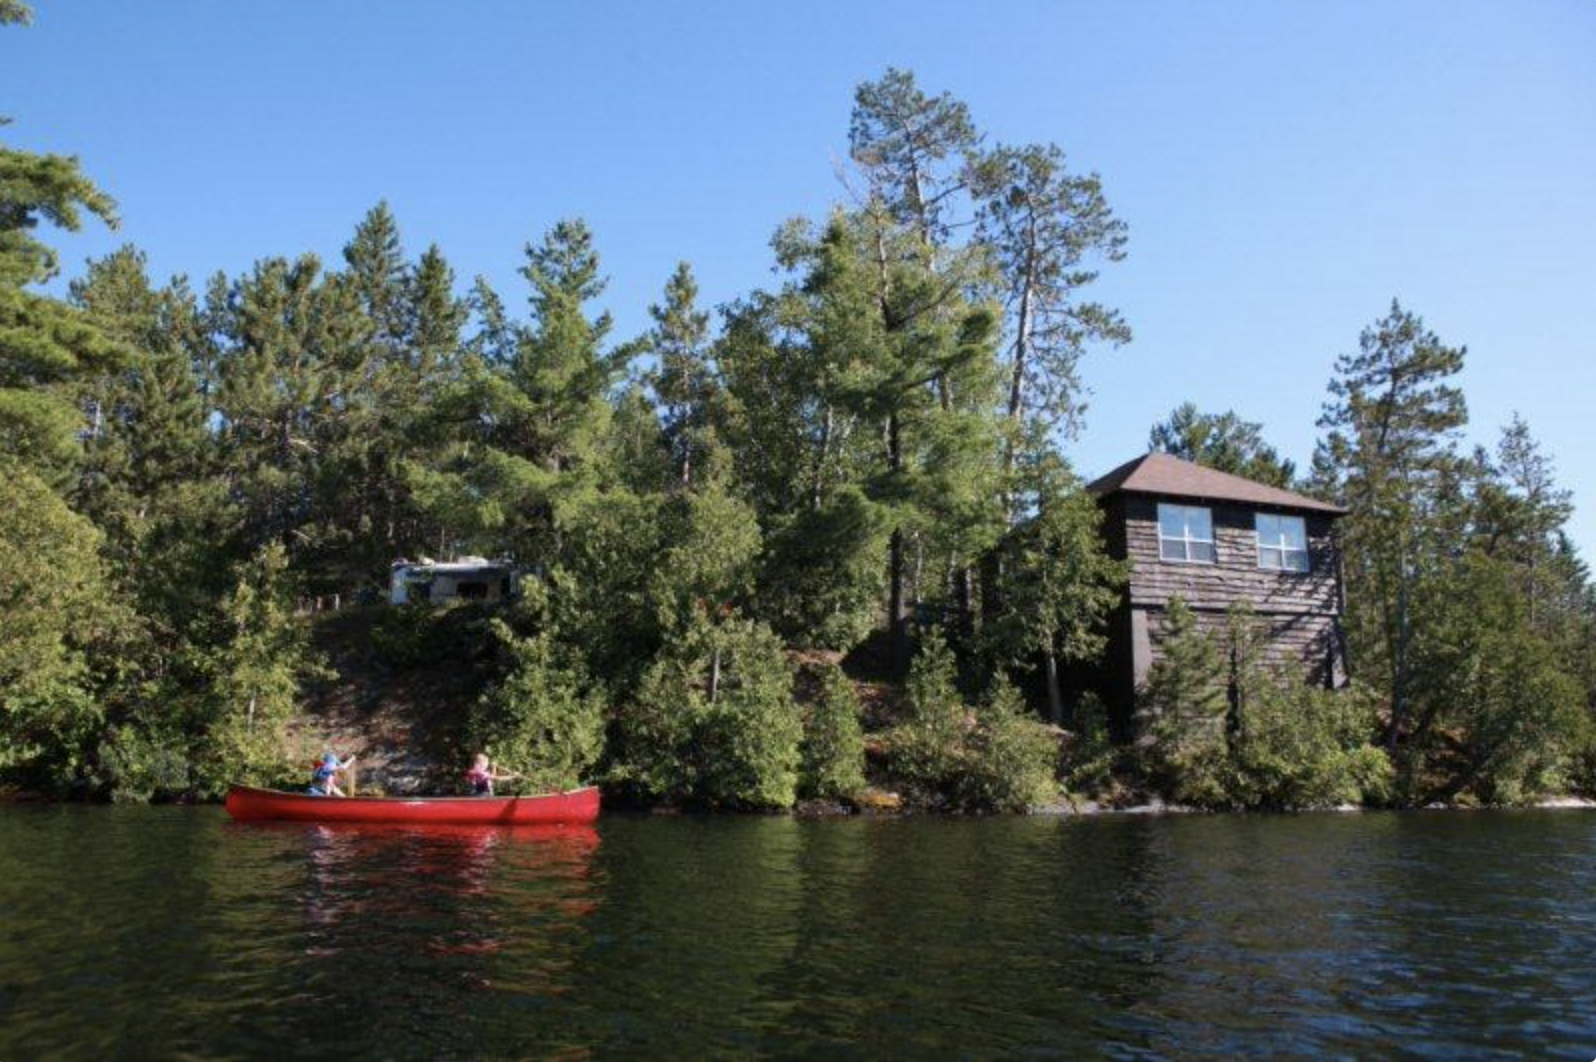 a pretty cabin tucked into the dense green forest on a rocky lake shore, under a brilliant blue sky. A red canoe is floating on the lake near the cabin.